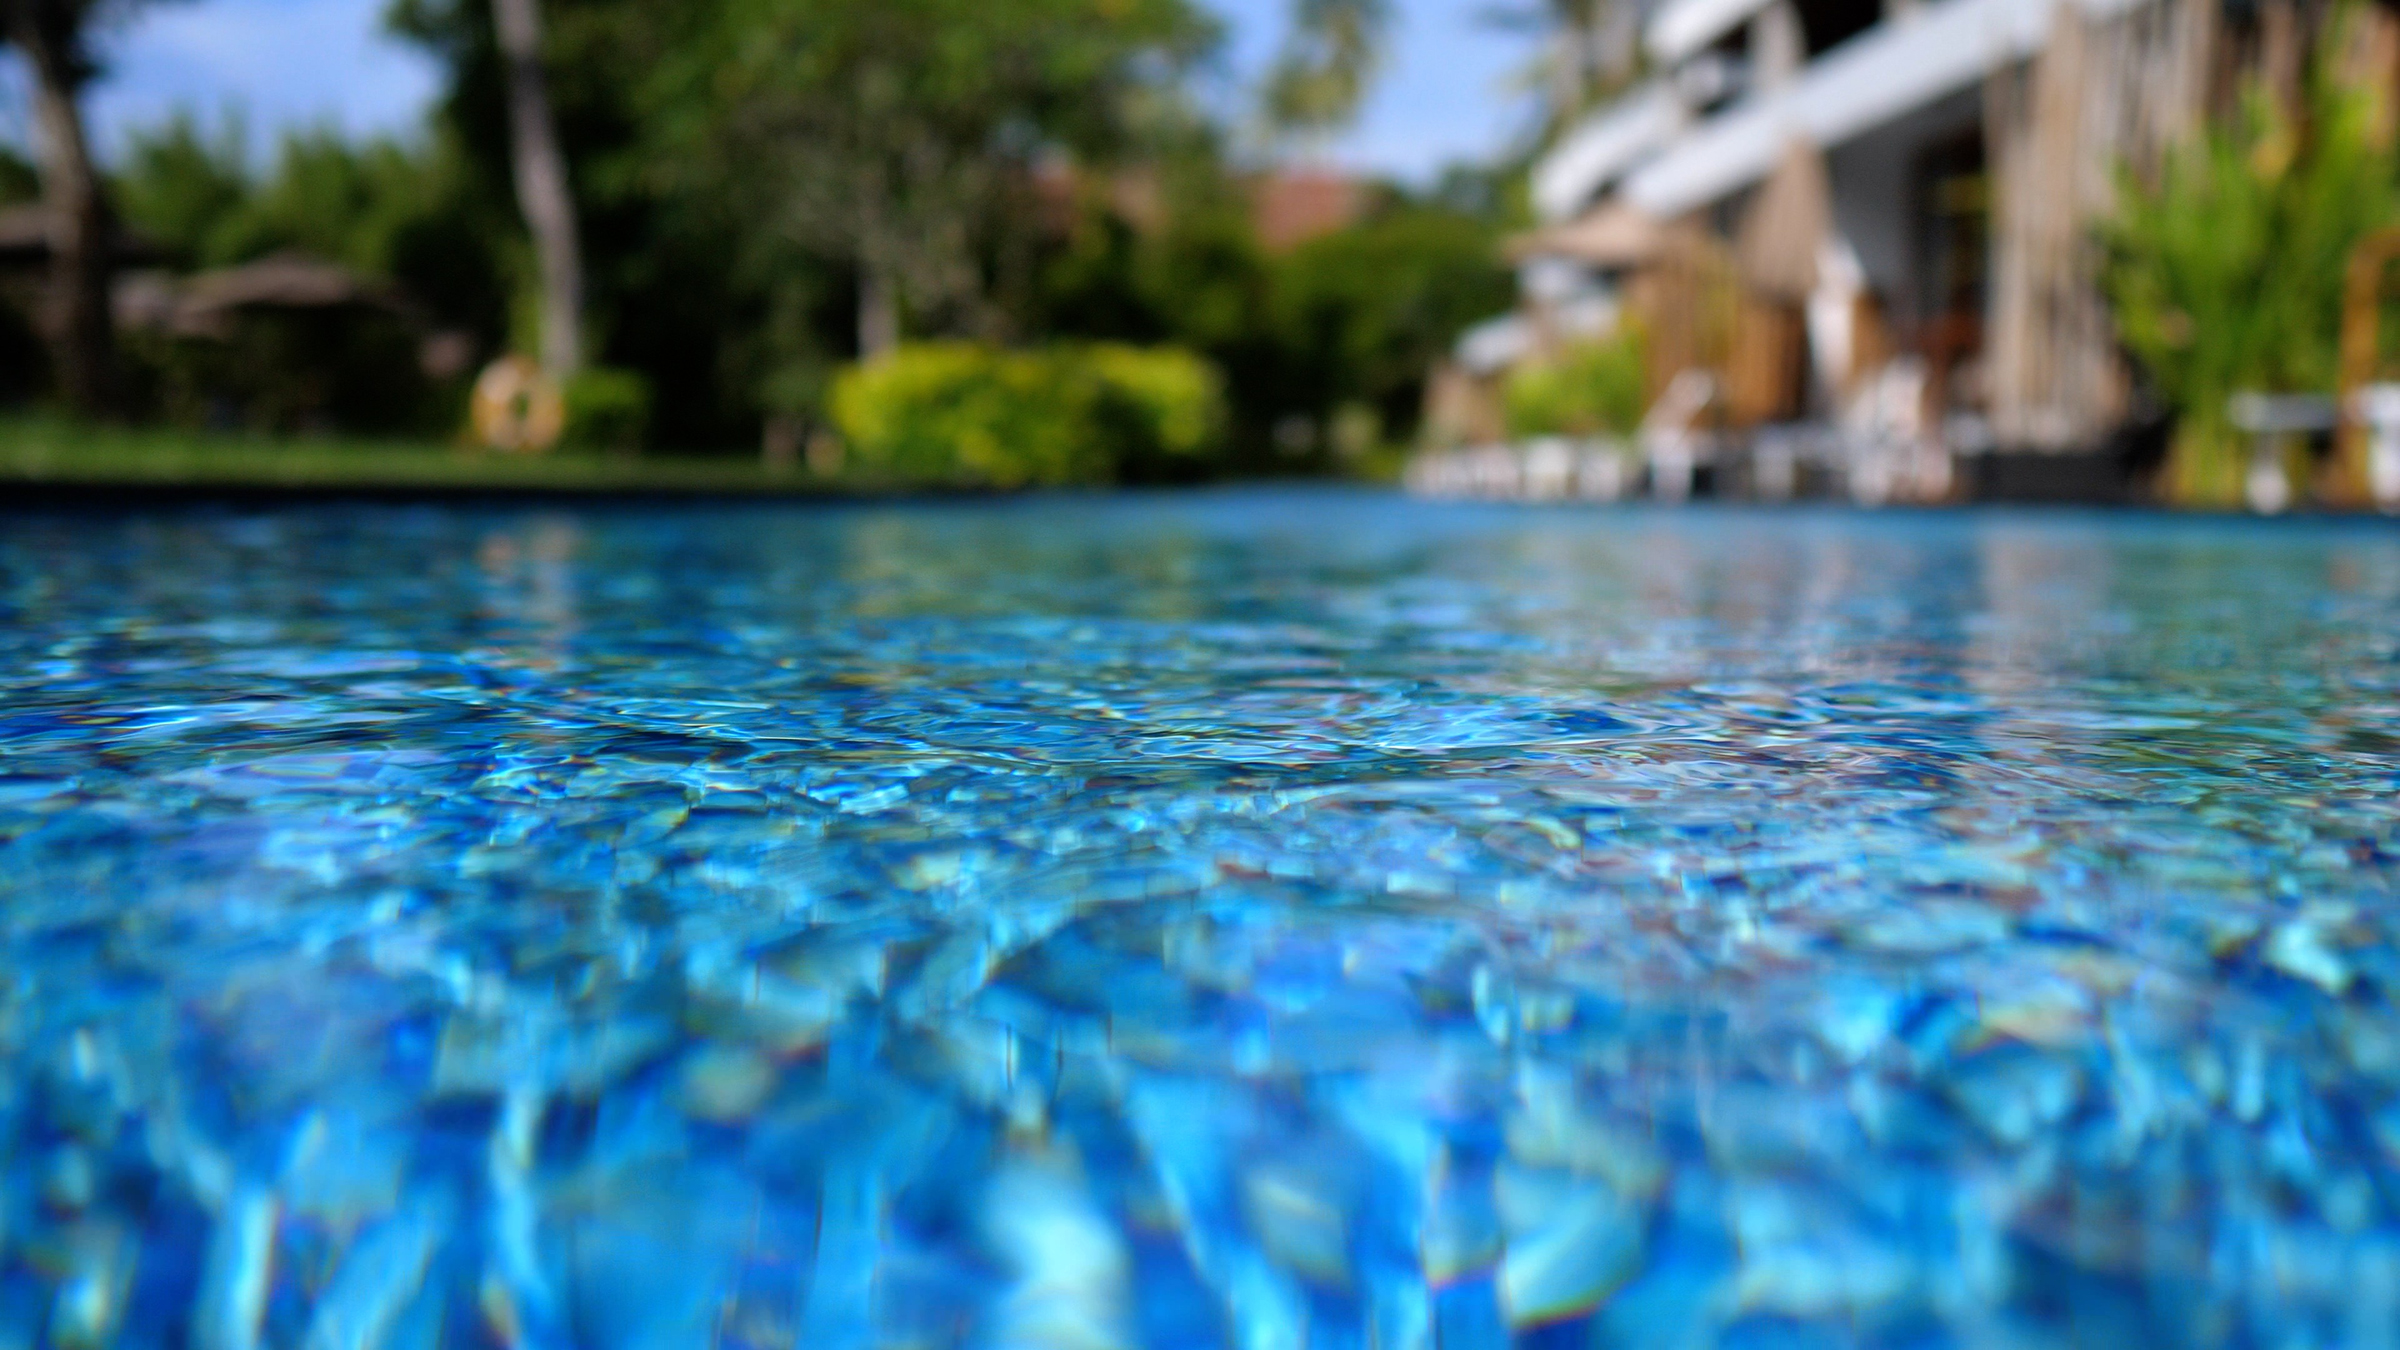 What to do once your pool is opened